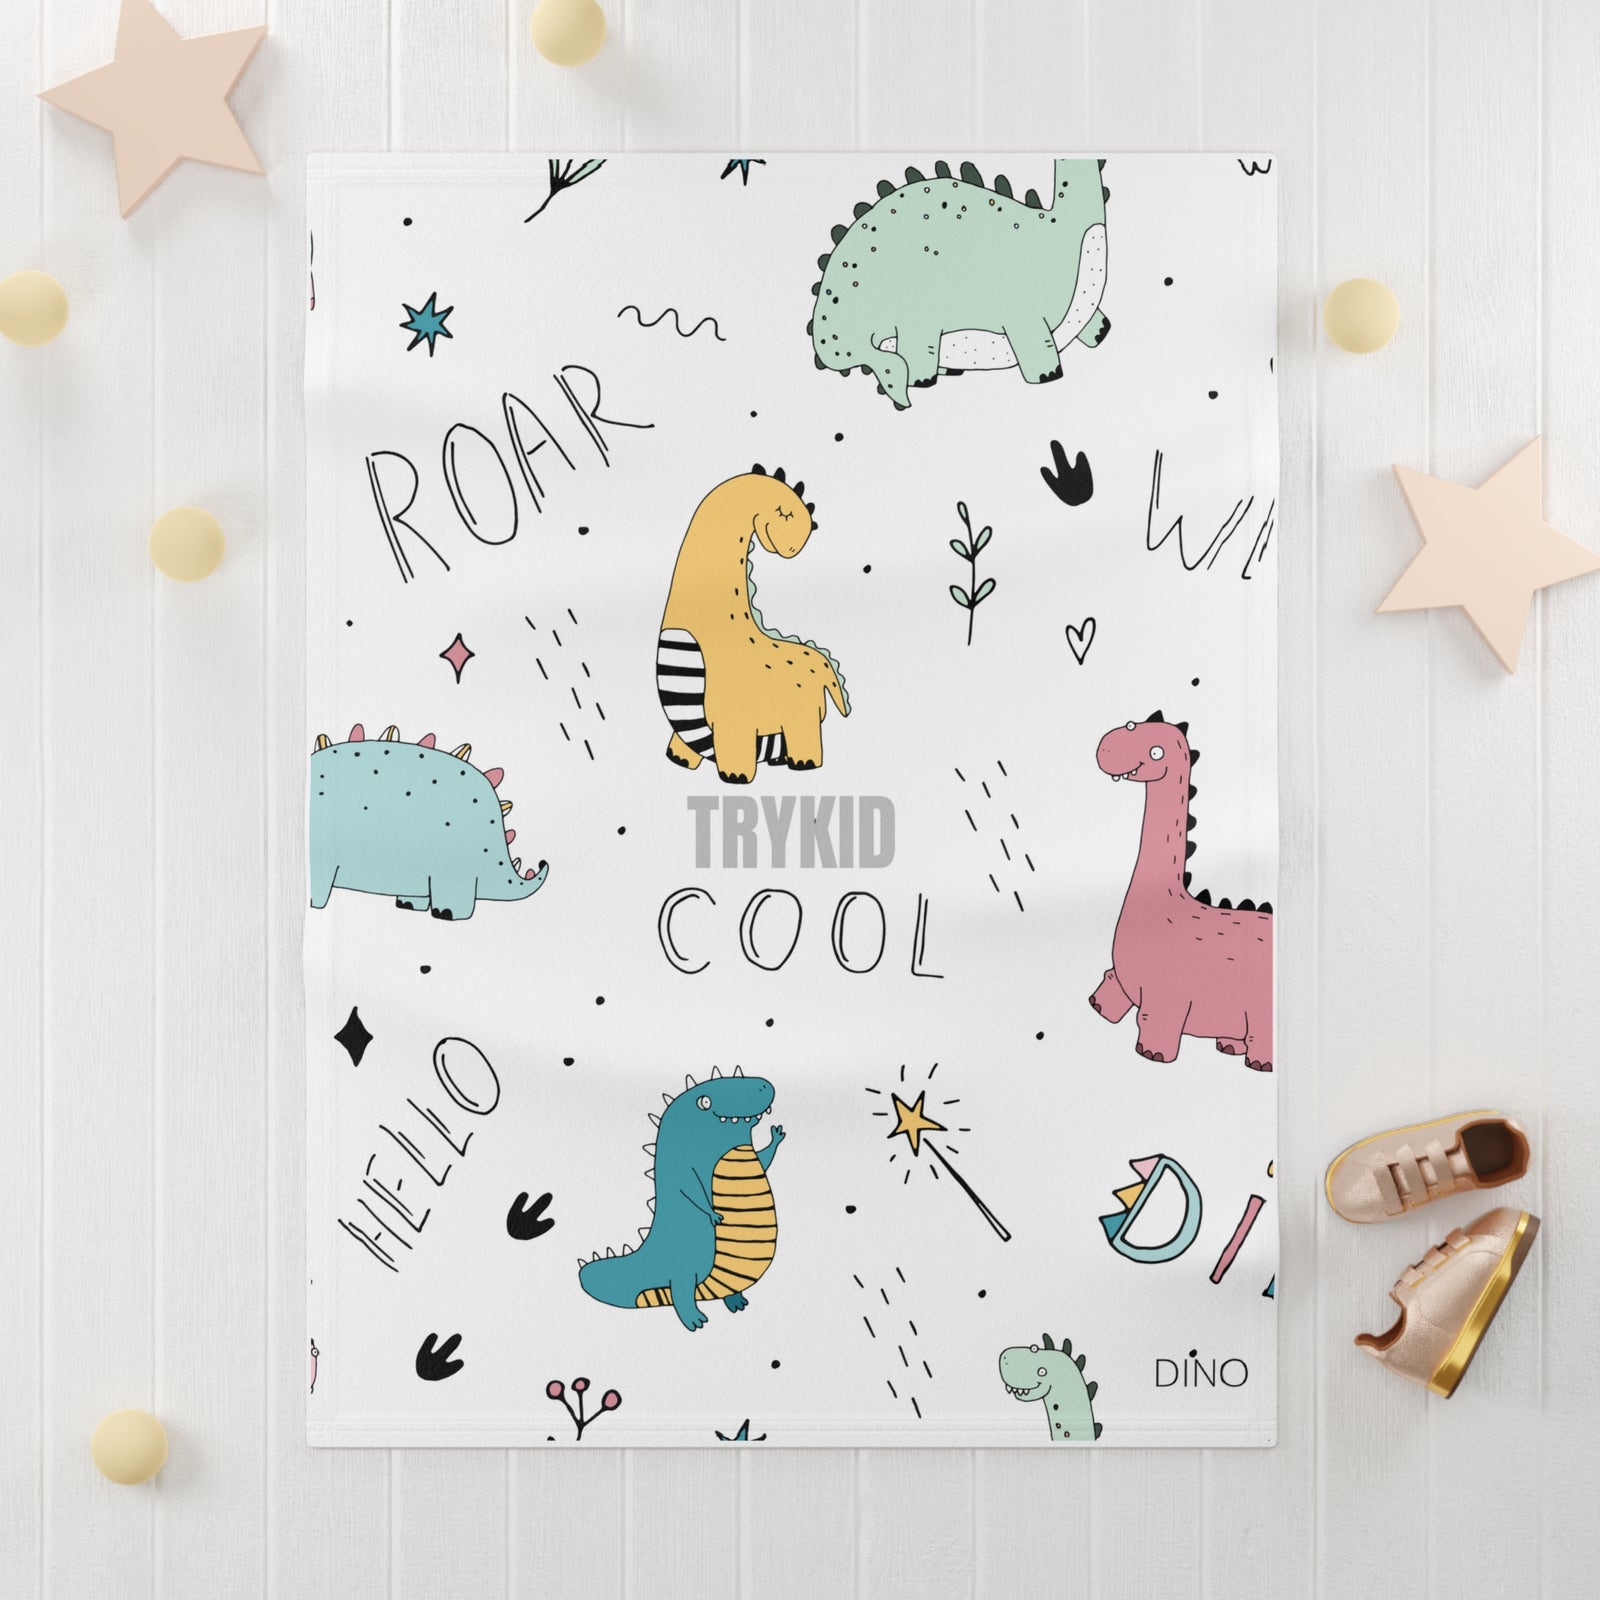 Dino Delight: Soft Fleece Baby Blanket with Playful Dinosaur Pattern Print and TryKid Logo for Cozy Cuddles